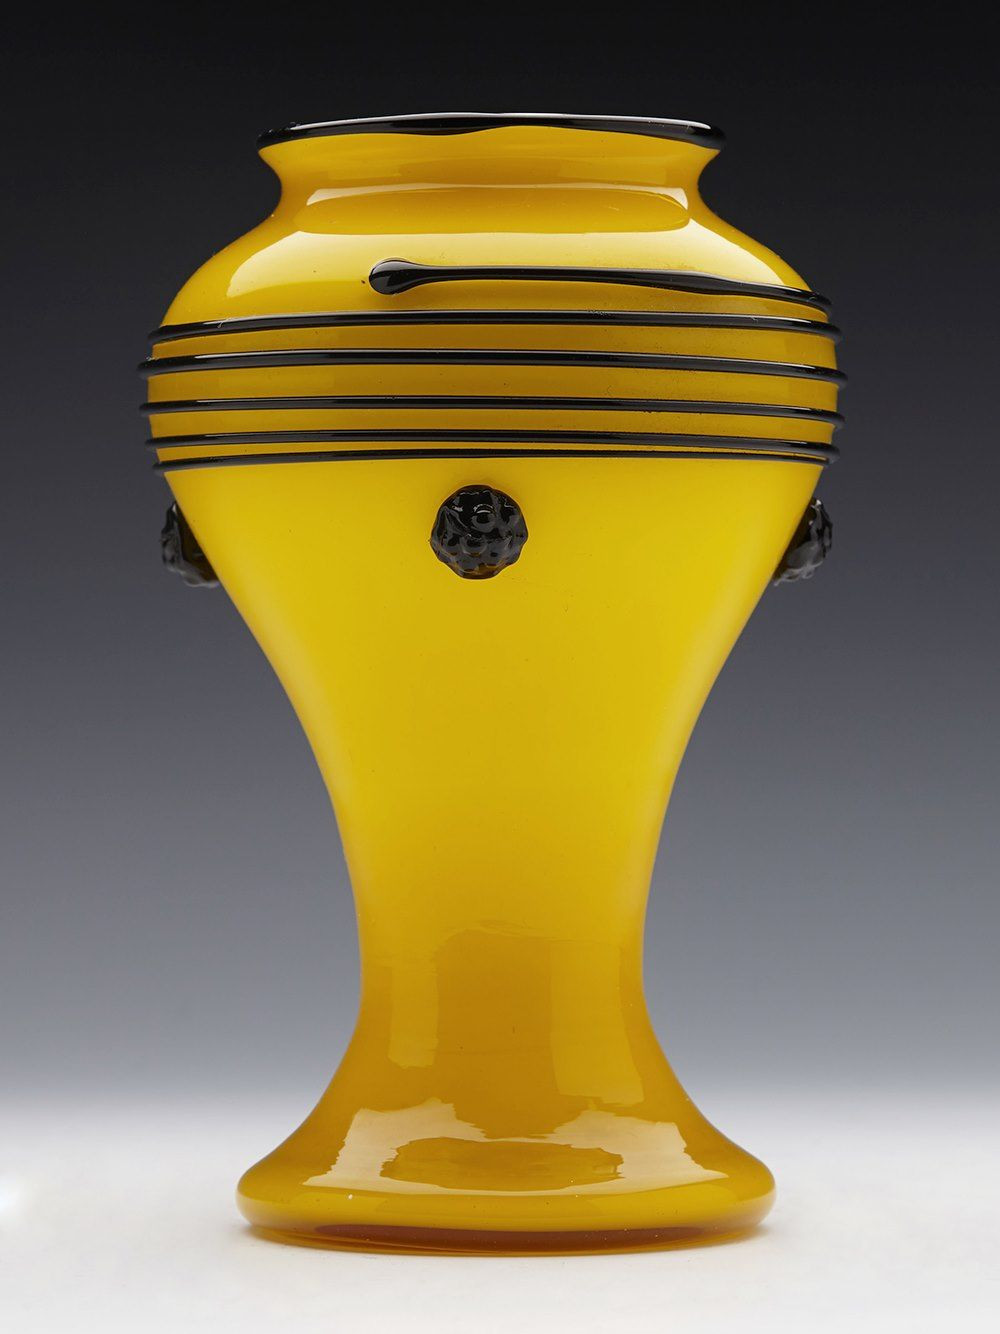 16 Fantastic Glass Candy Vases 2024 free download glass candy vases of stunning loetz yellow tango art glass vase designed by michael for stunning loetz yellow tango art glass vase designed by michael powolny c 1916